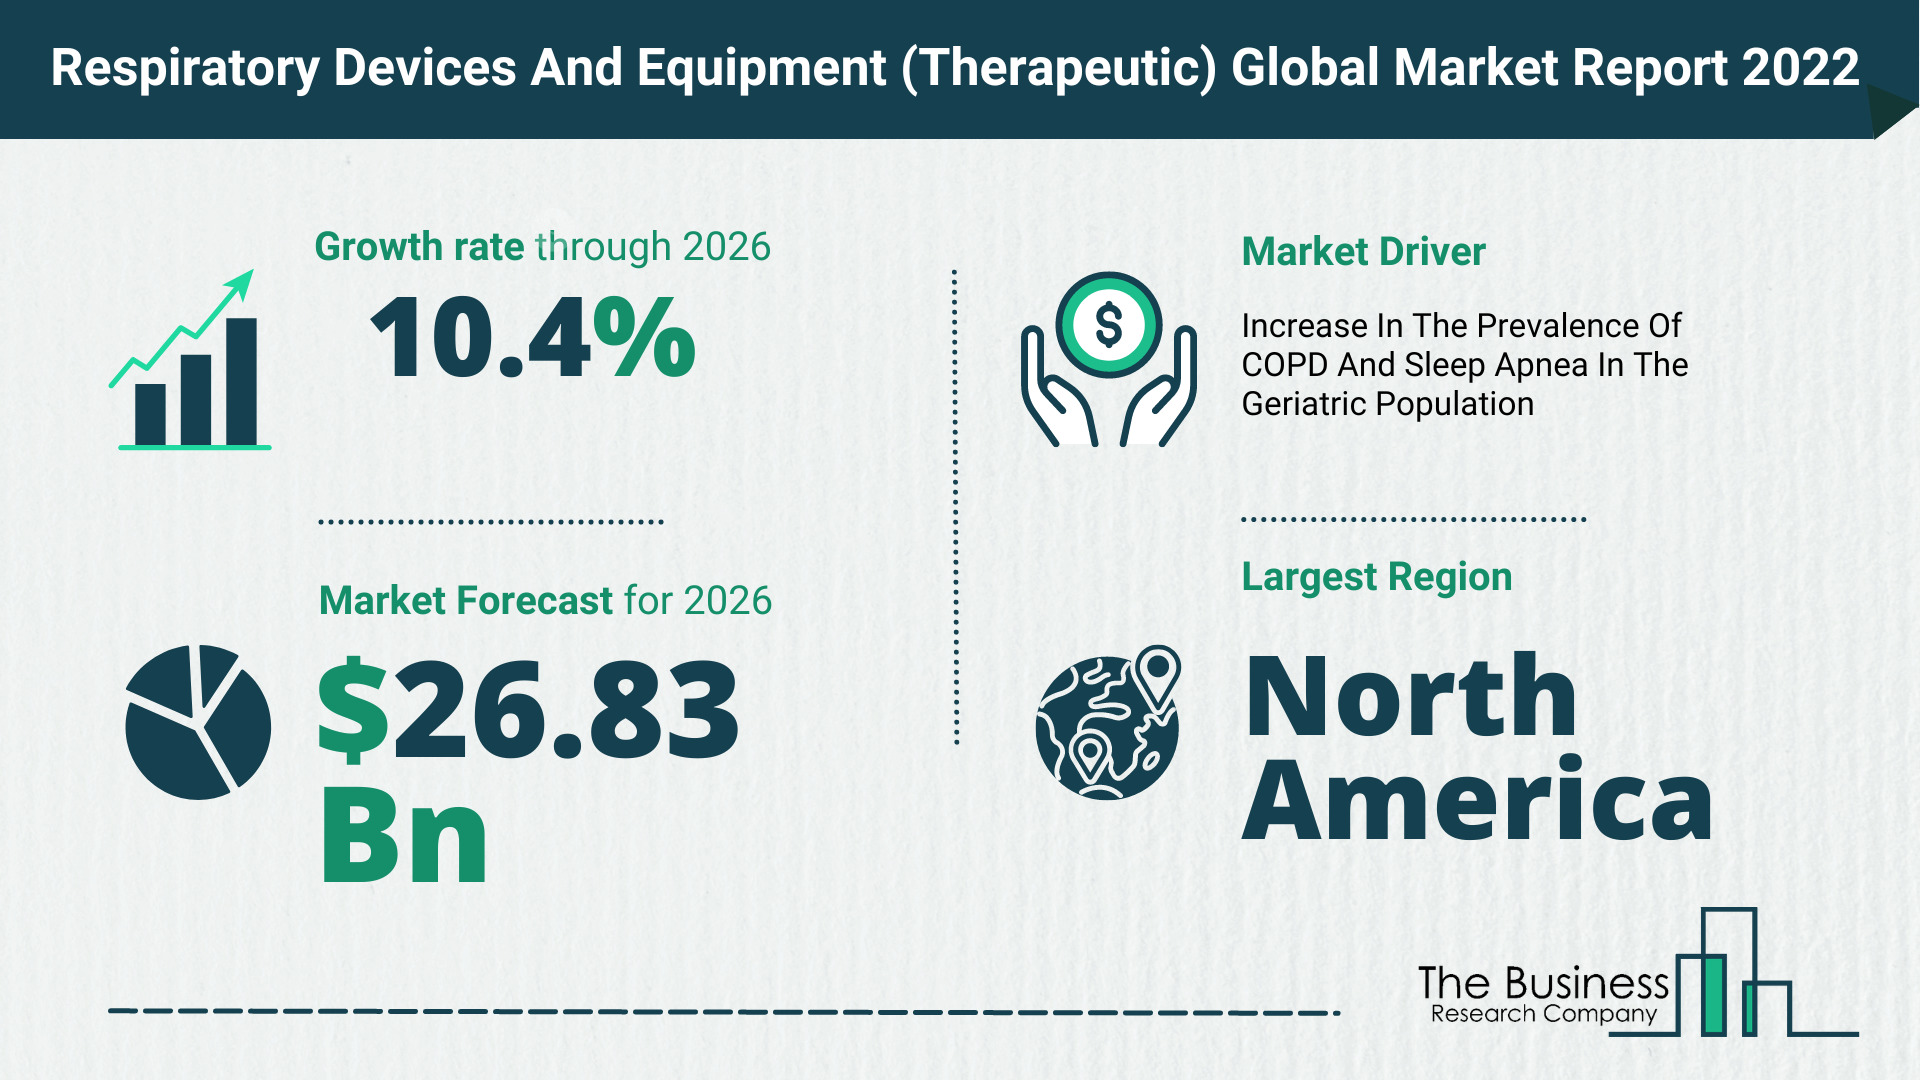 Global Respiratory Devices And Equipment (Therapeutic) Market Size